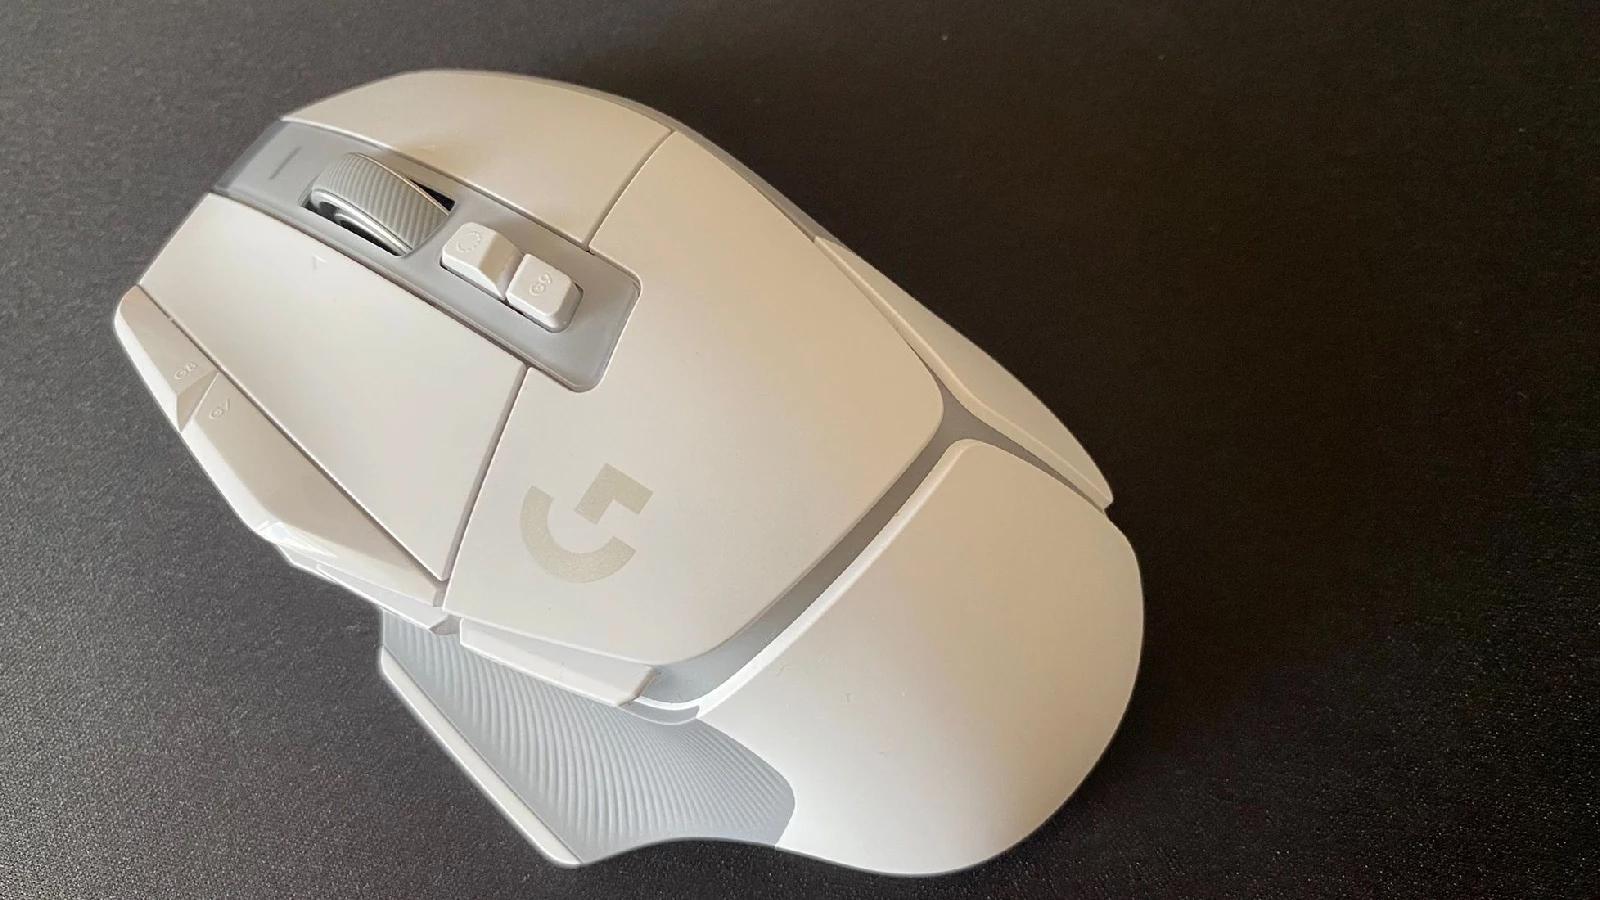 Endgame Gear XM2we: New gaming mouse with strong specs at a fair price